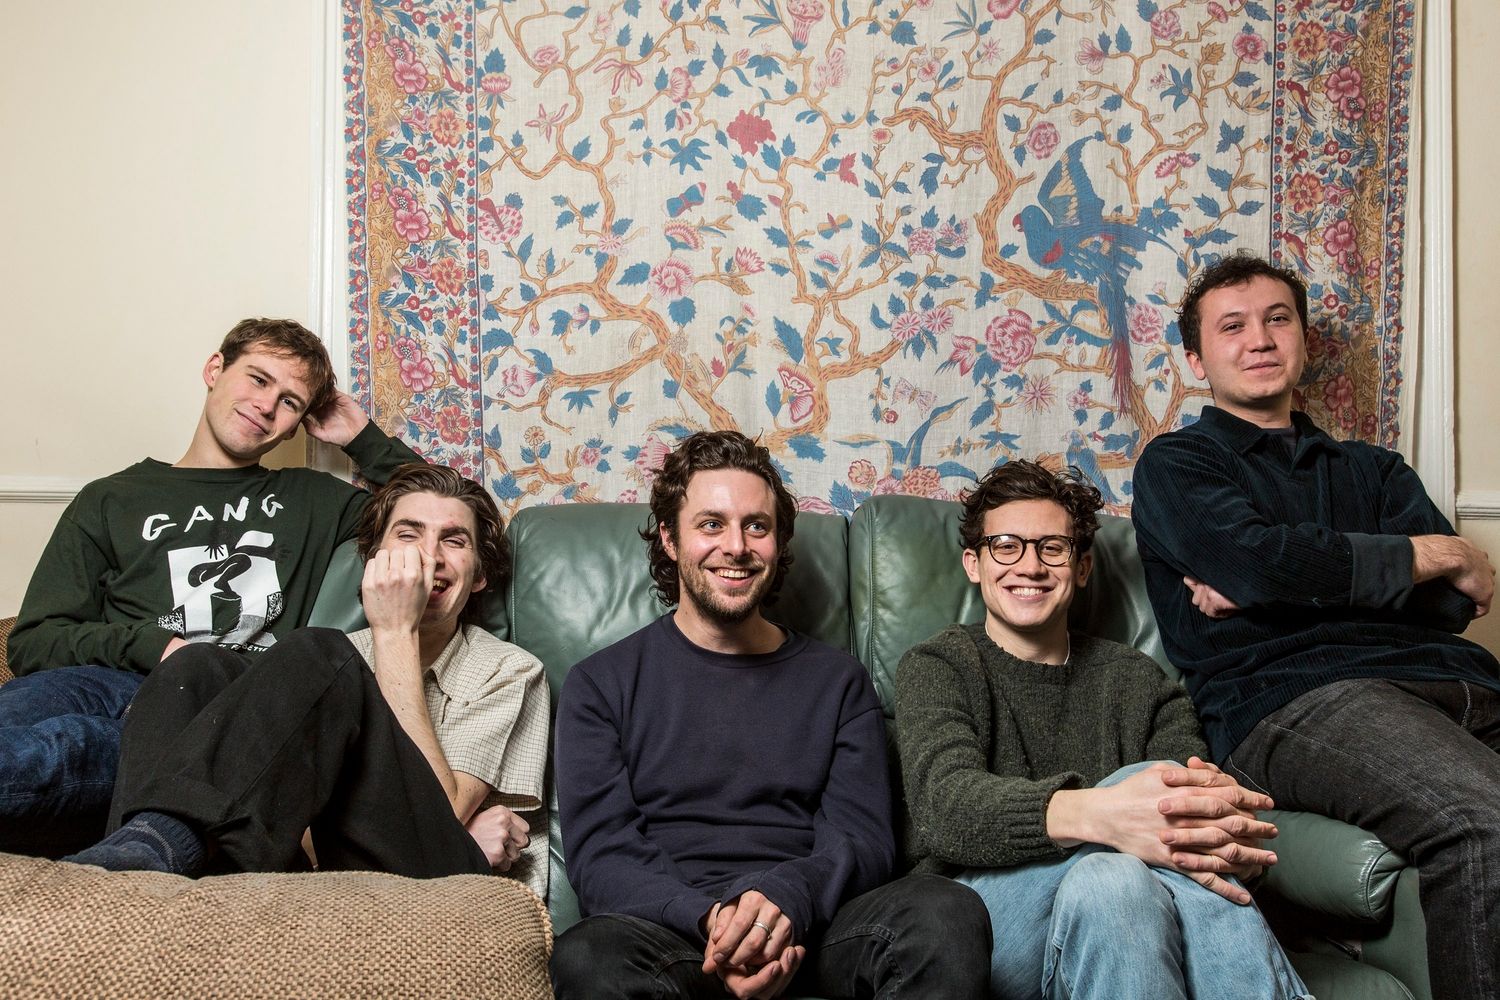 Could it be magic? The Magic Gang team up with Felix Maccabees' Yala! Records